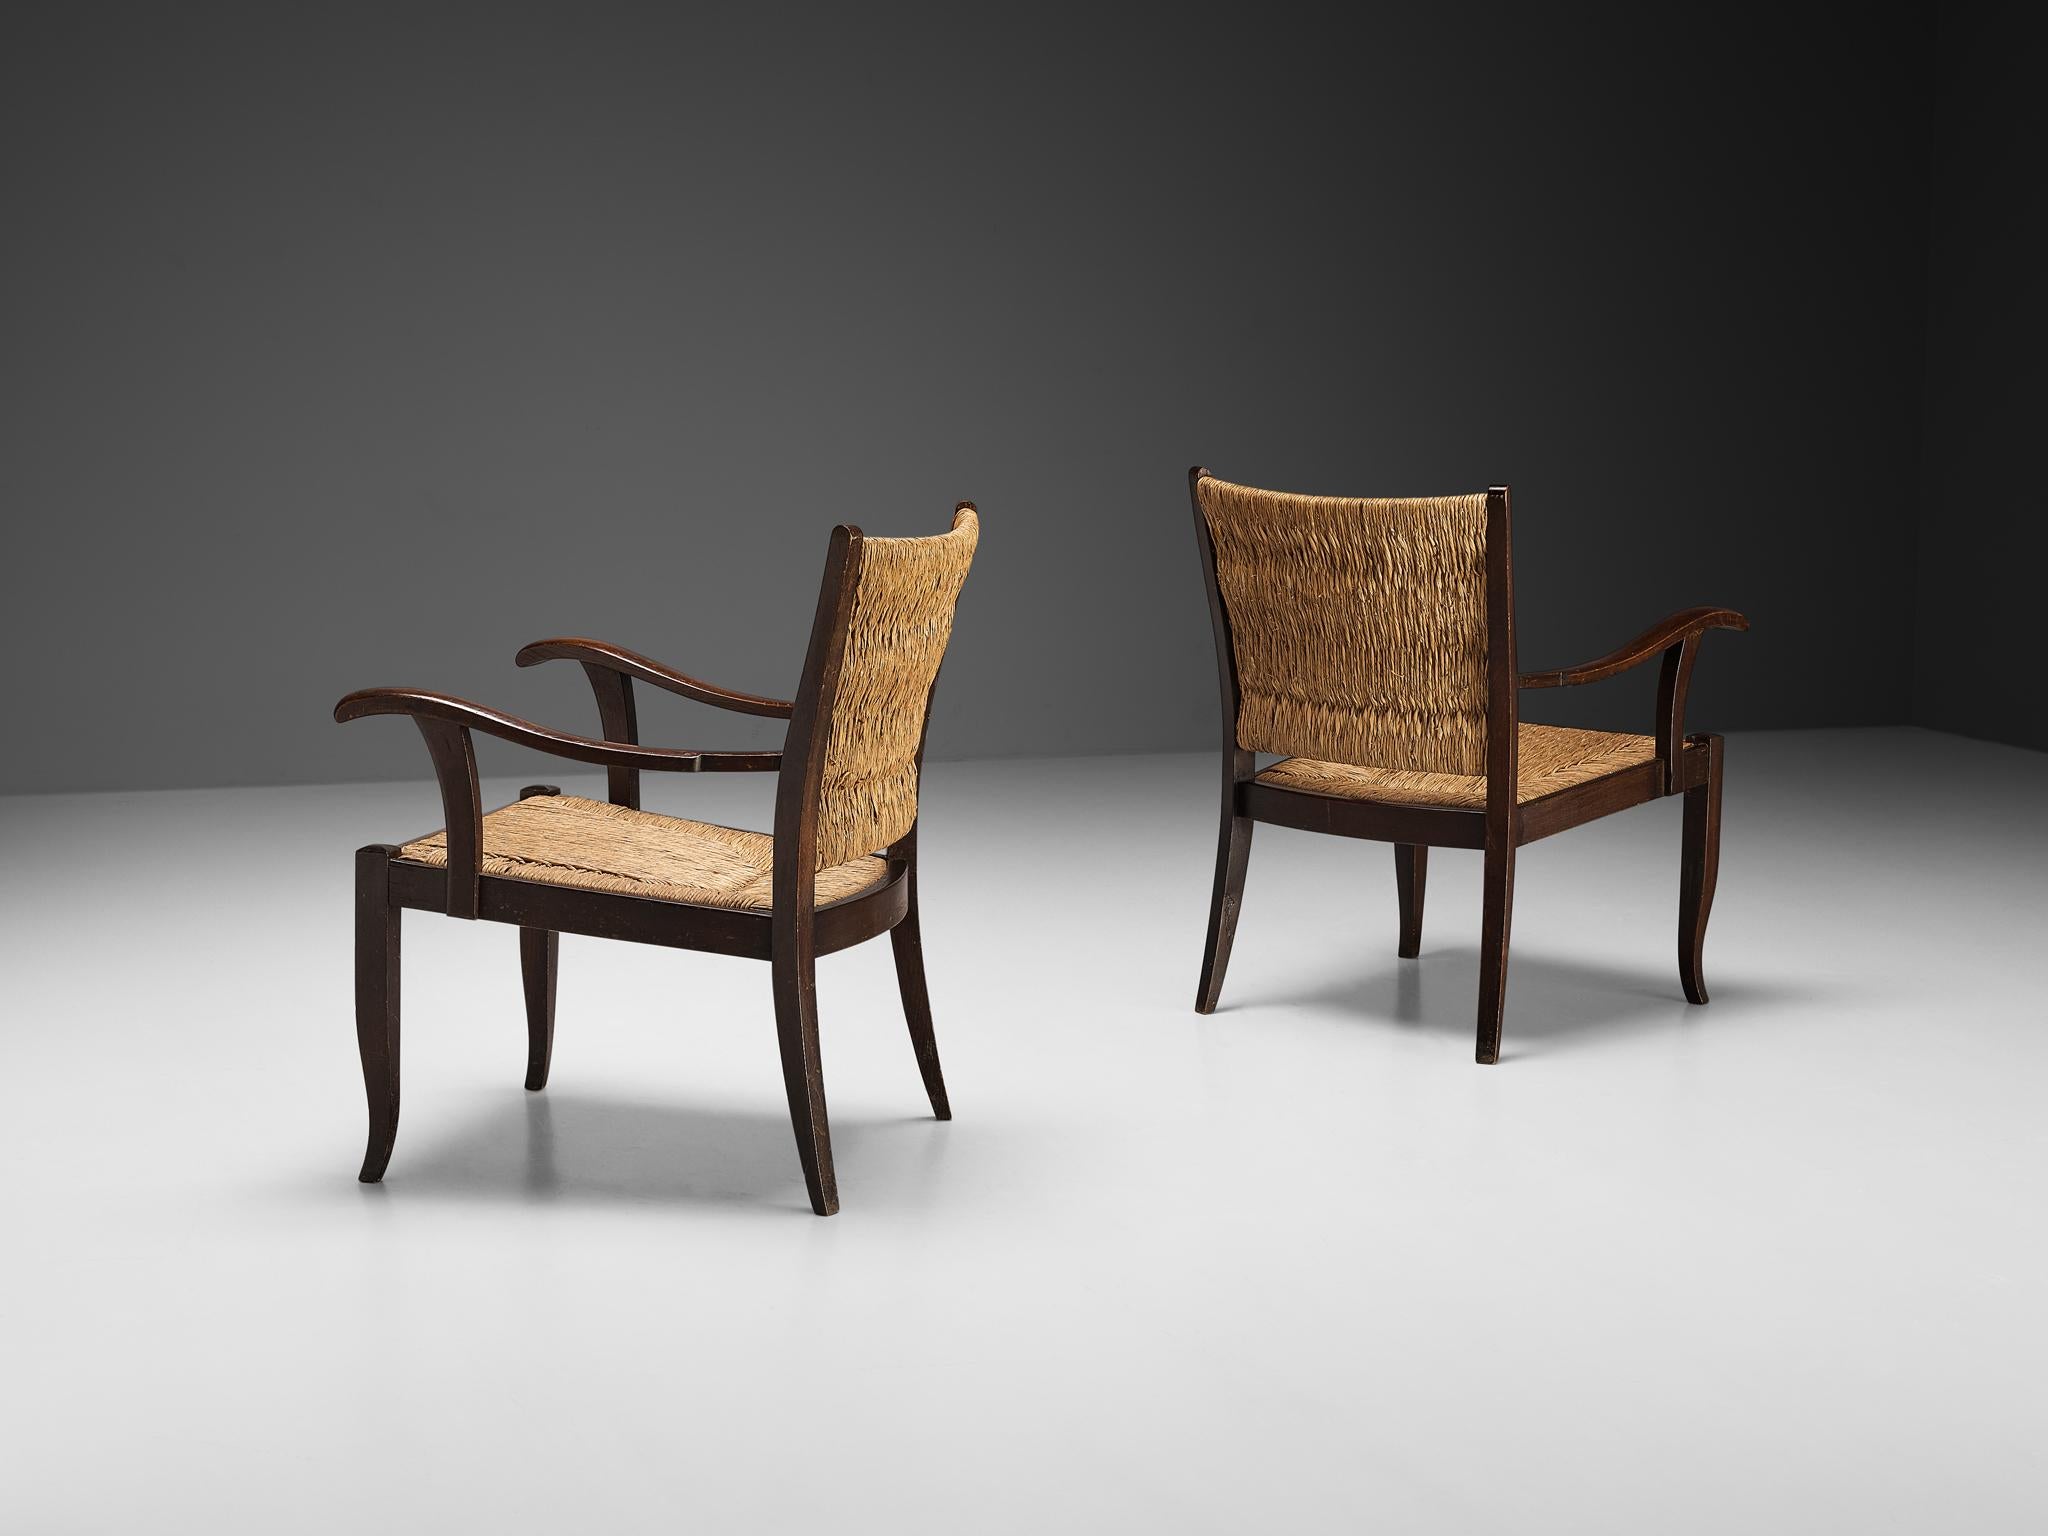 Pair of armchairs, straw, lacquered wood, Europe 1950s

In the refined atmosphere of 1950s Europe, these distinguished armchairs crafted from straw and lacquered wood exude timeless elegance. Their simple yet superb design reflects the era's